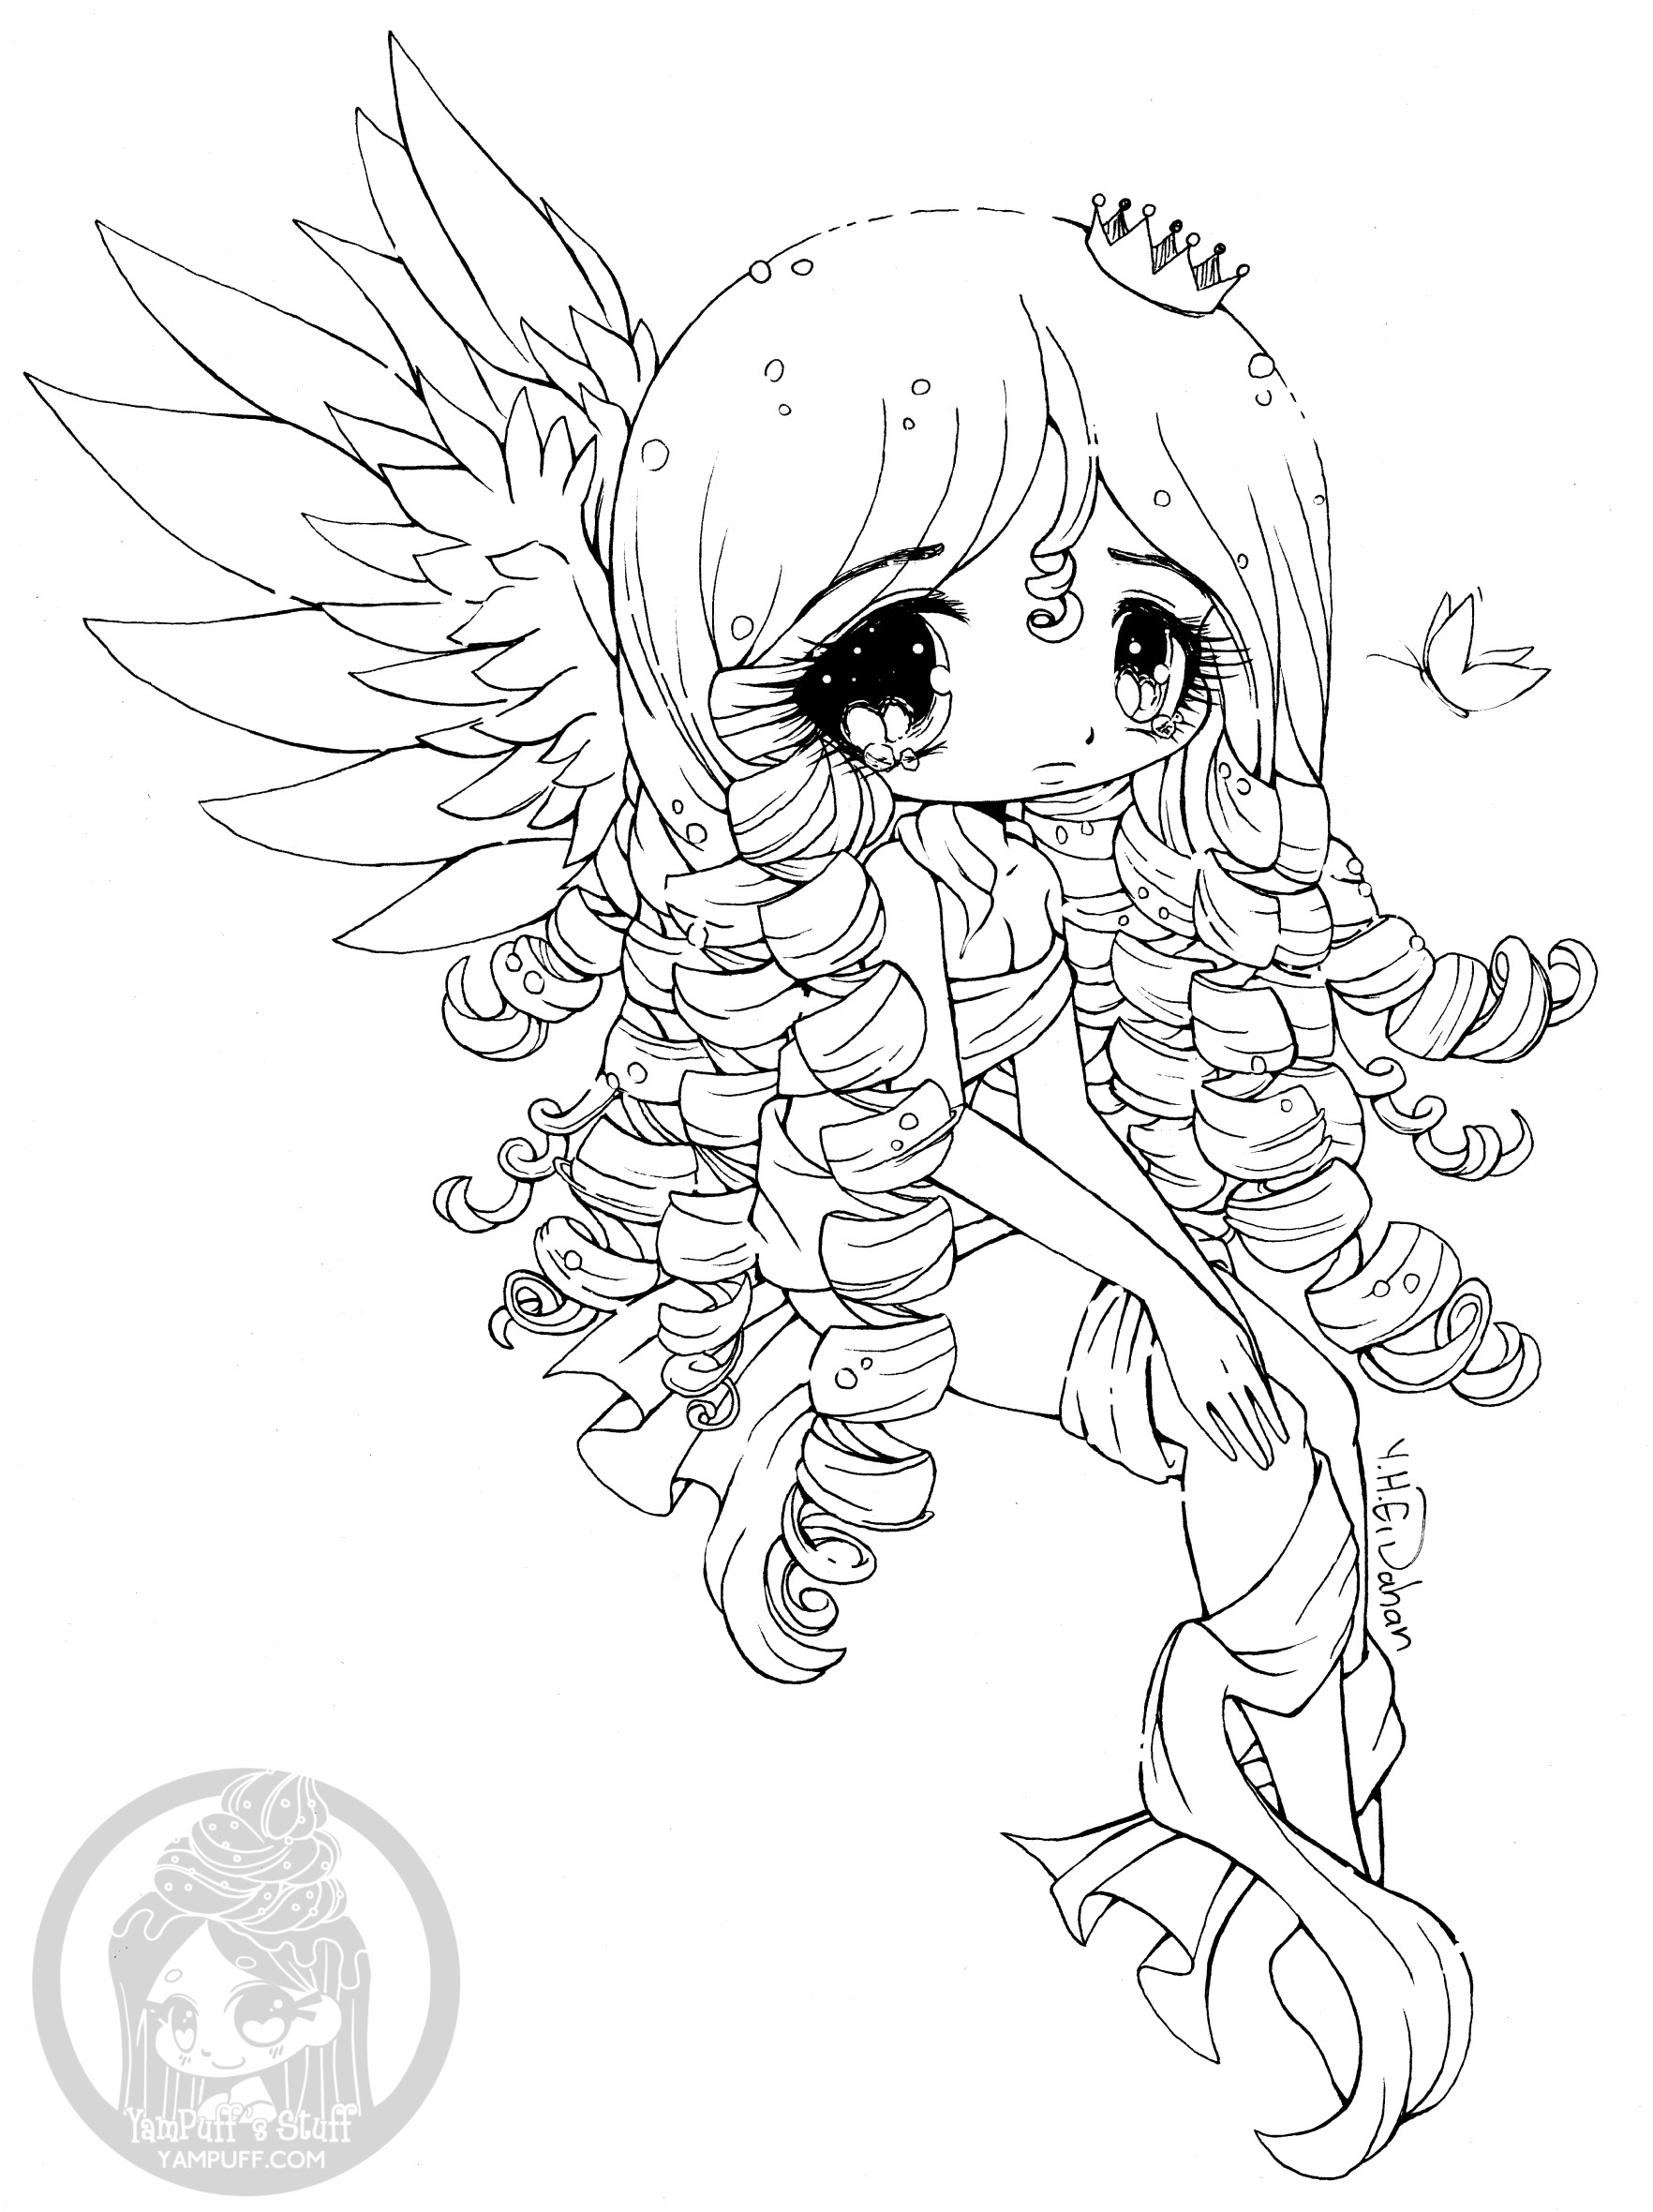 The 25 Best Ideas for Chibi Girls Coloring Pages Home, Family, Style